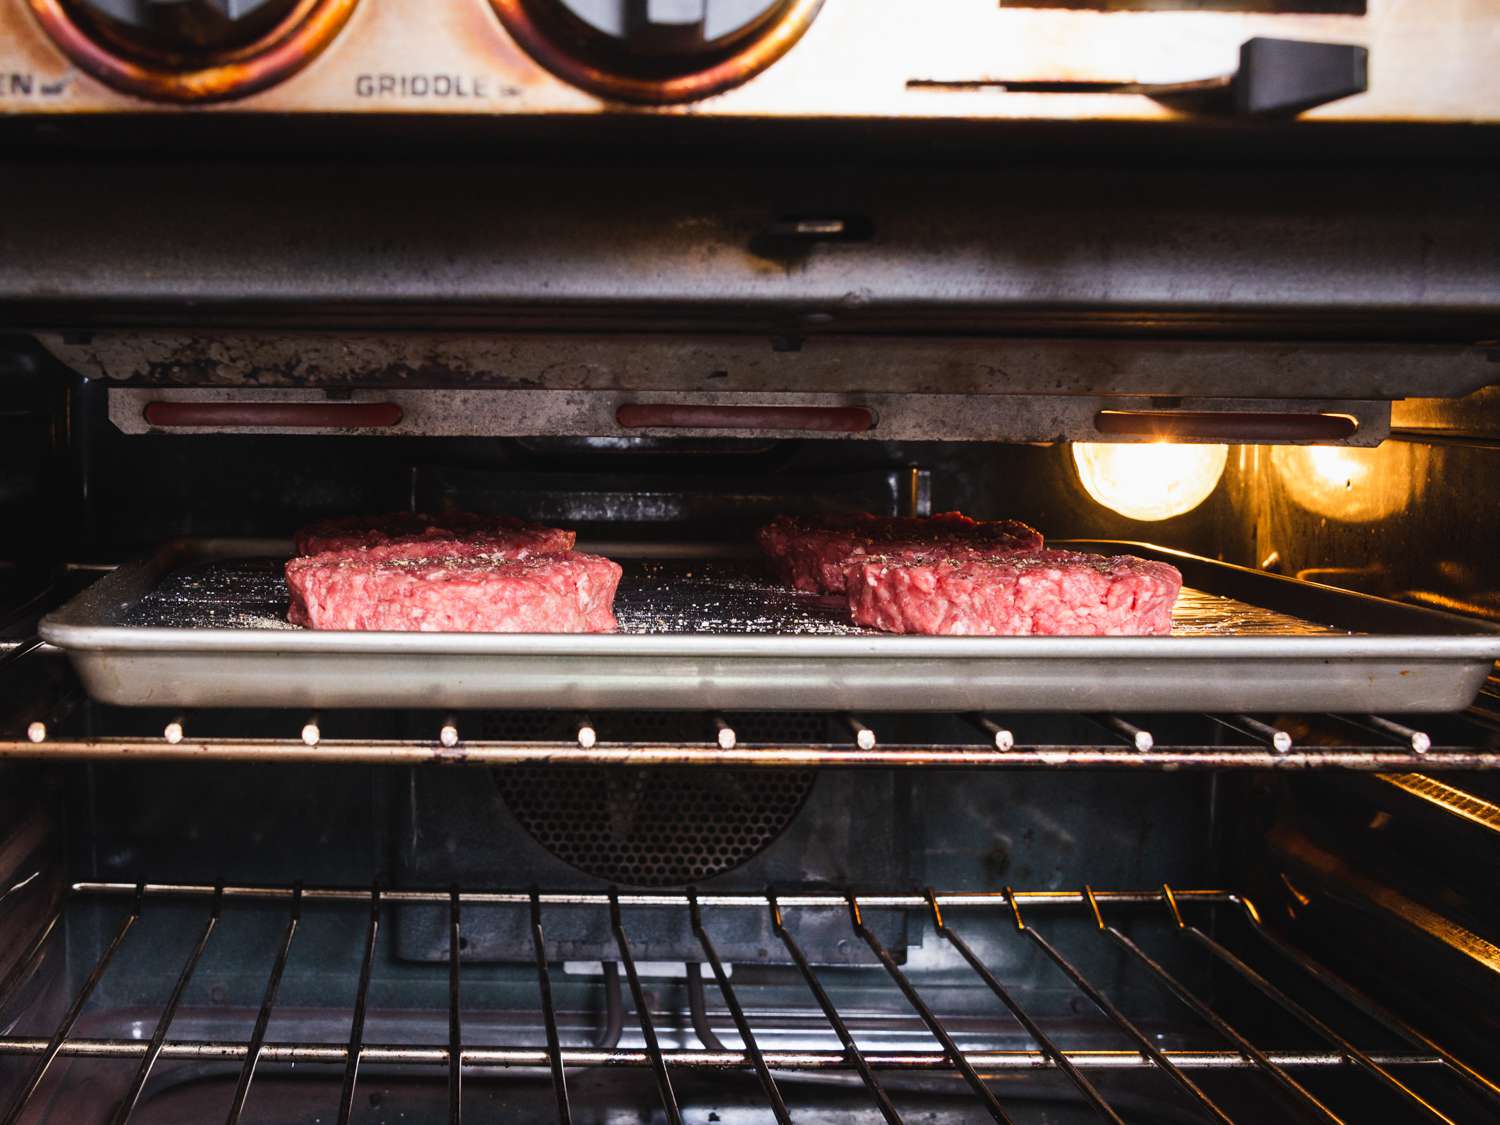 https://recipes.net/wp-content/uploads/2024/01/how-to-broil-frozen-burgers-in-the-oven-1704226817.jpg